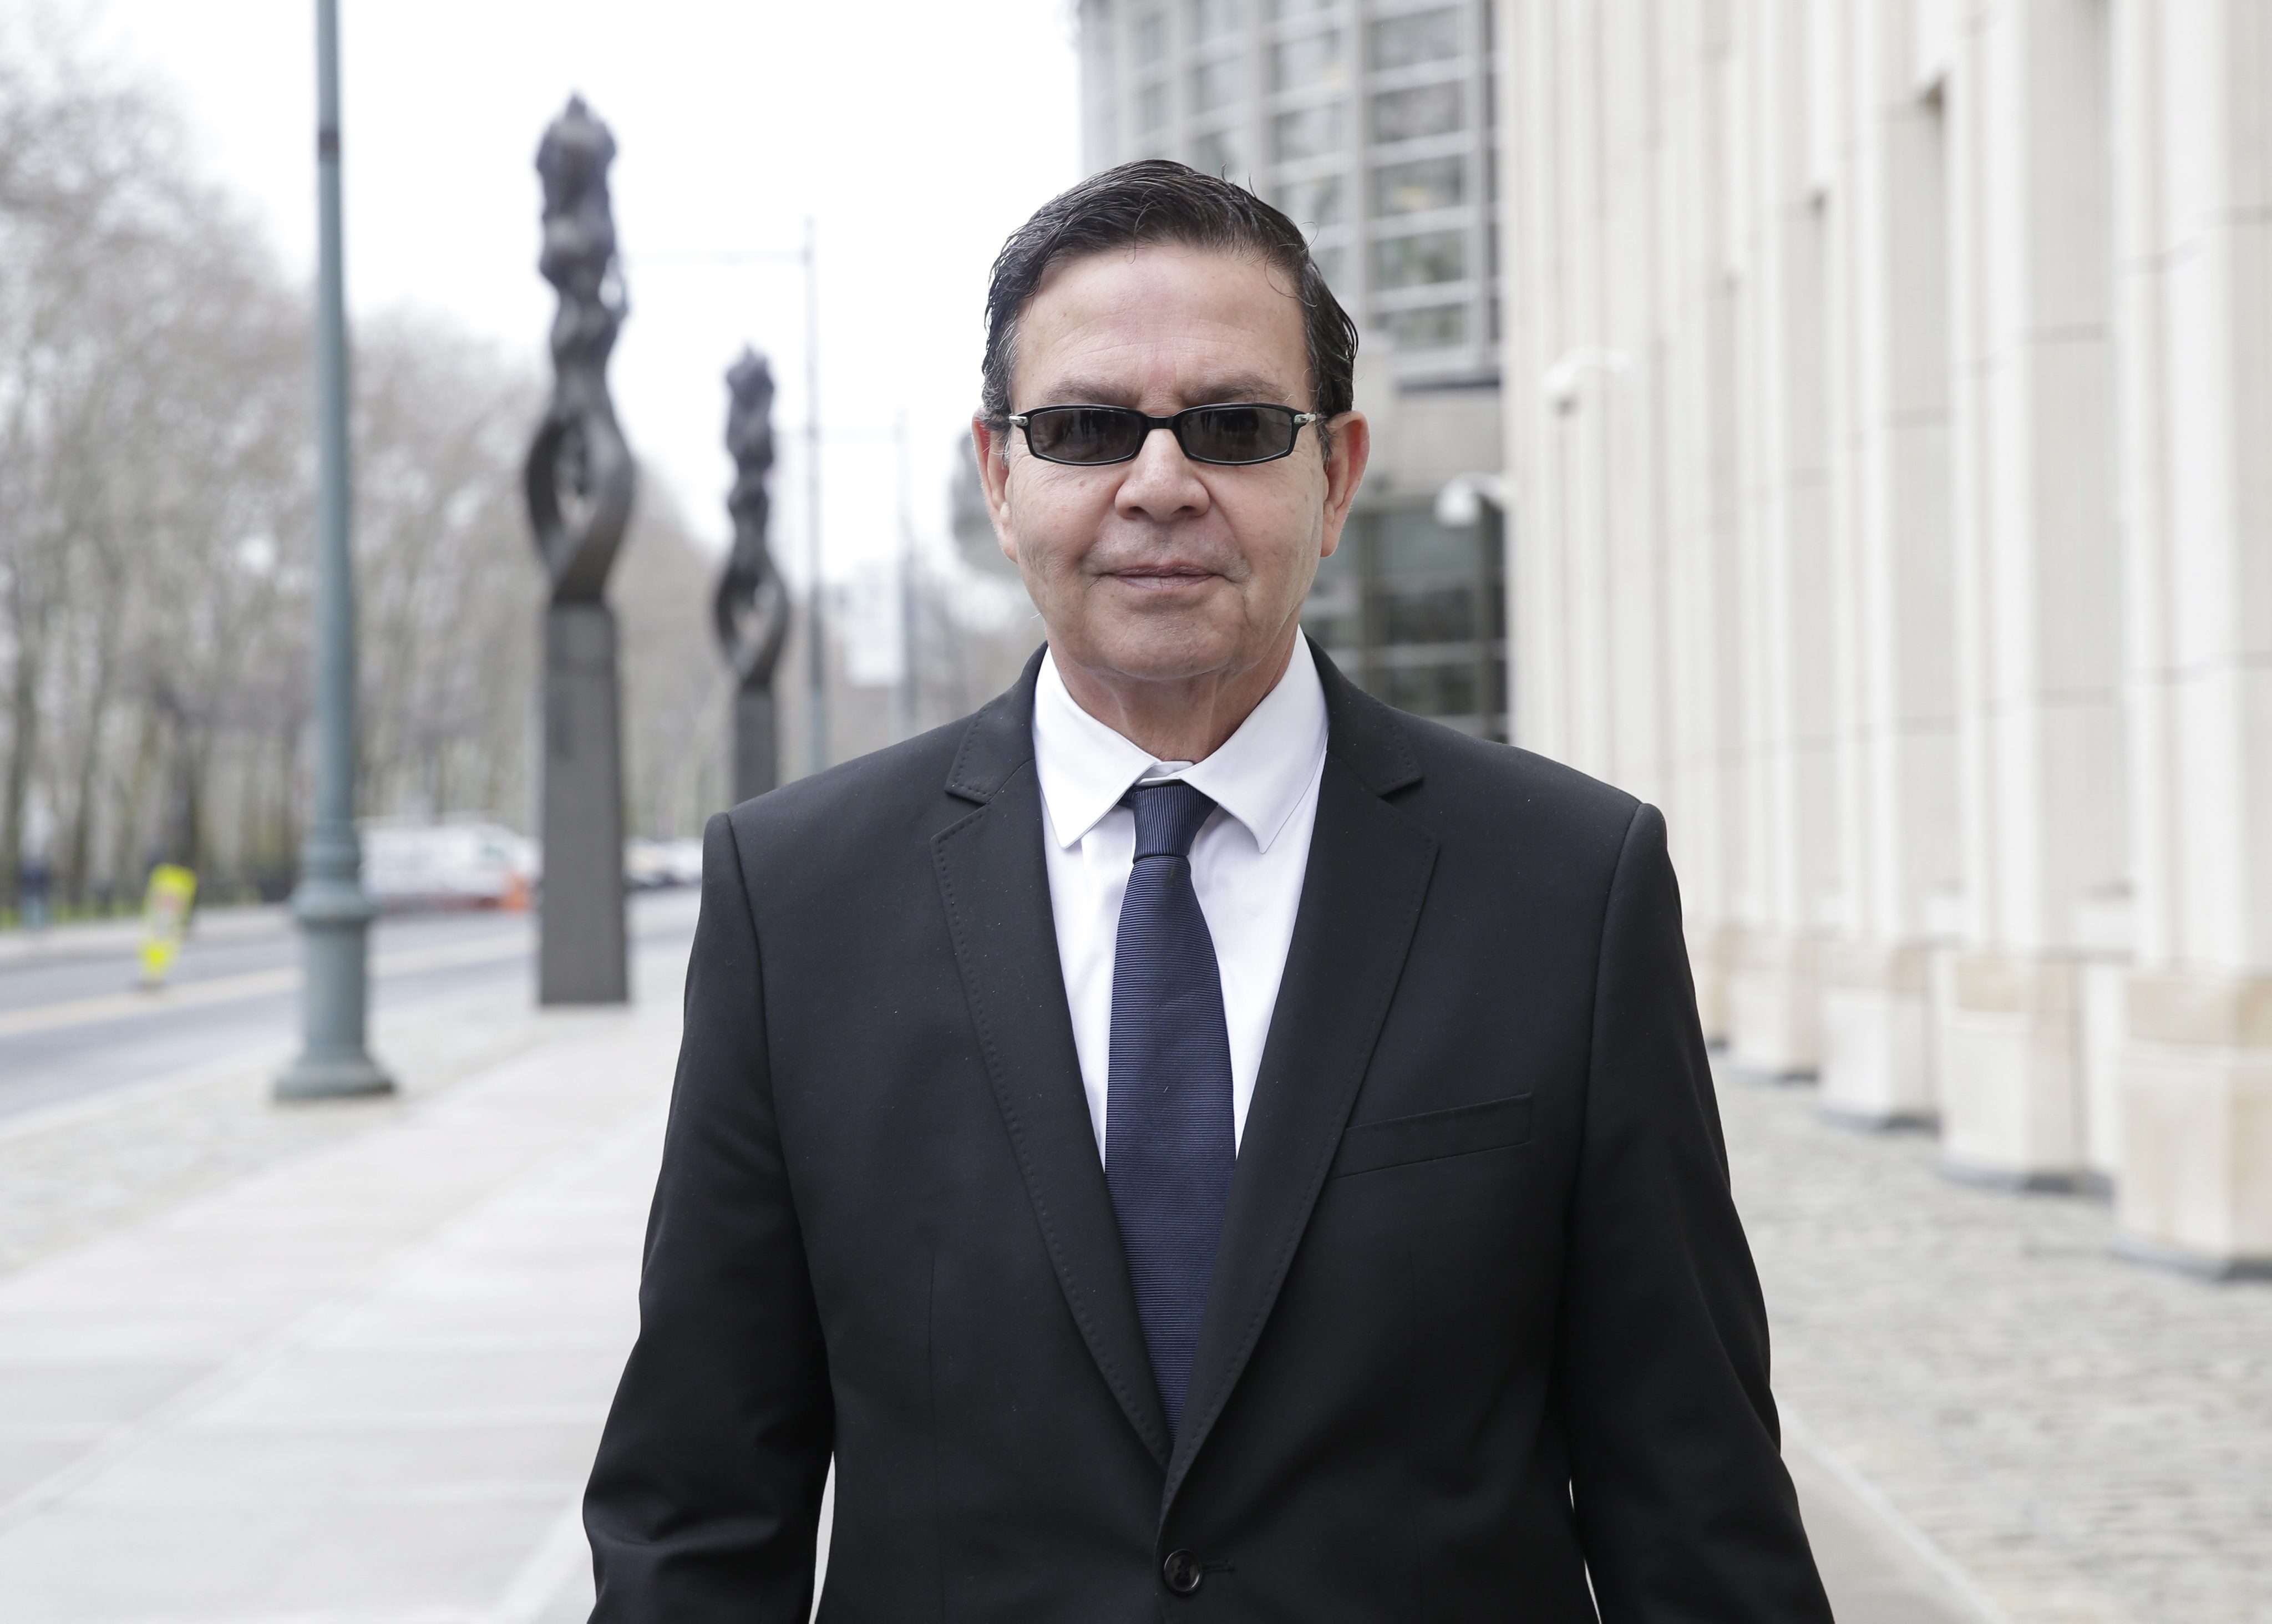 Former Honduran president Rafael Callejas leaves the federal courthouse in Brooklyn after pleading guilty to conspiracy charges in the Fifa scandal. Photo: EPA